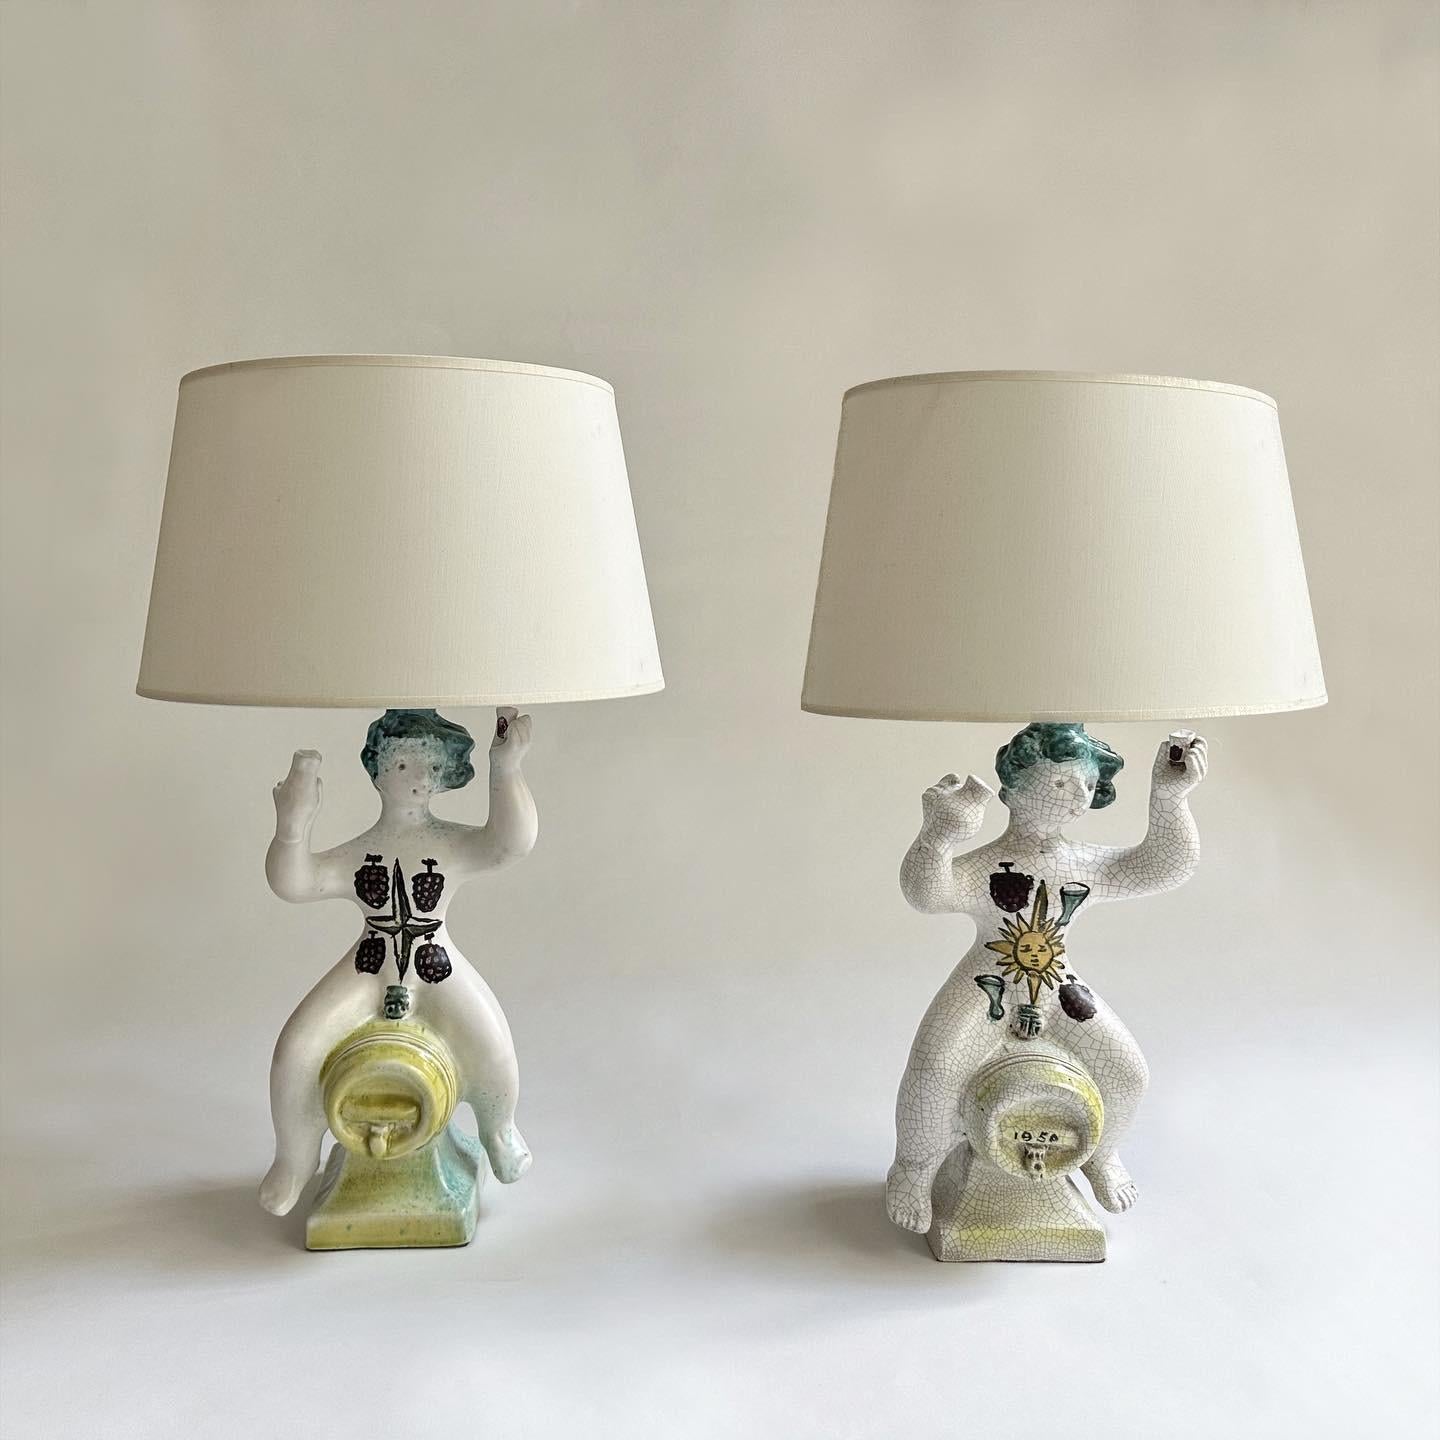 GEORGES JOUVE
PAIR OF LAMPS

circa 1950
glazed earthenware and fabric shade
Signed JOUVE and with the artist's cypher on the underside

Height of each : 23 in.